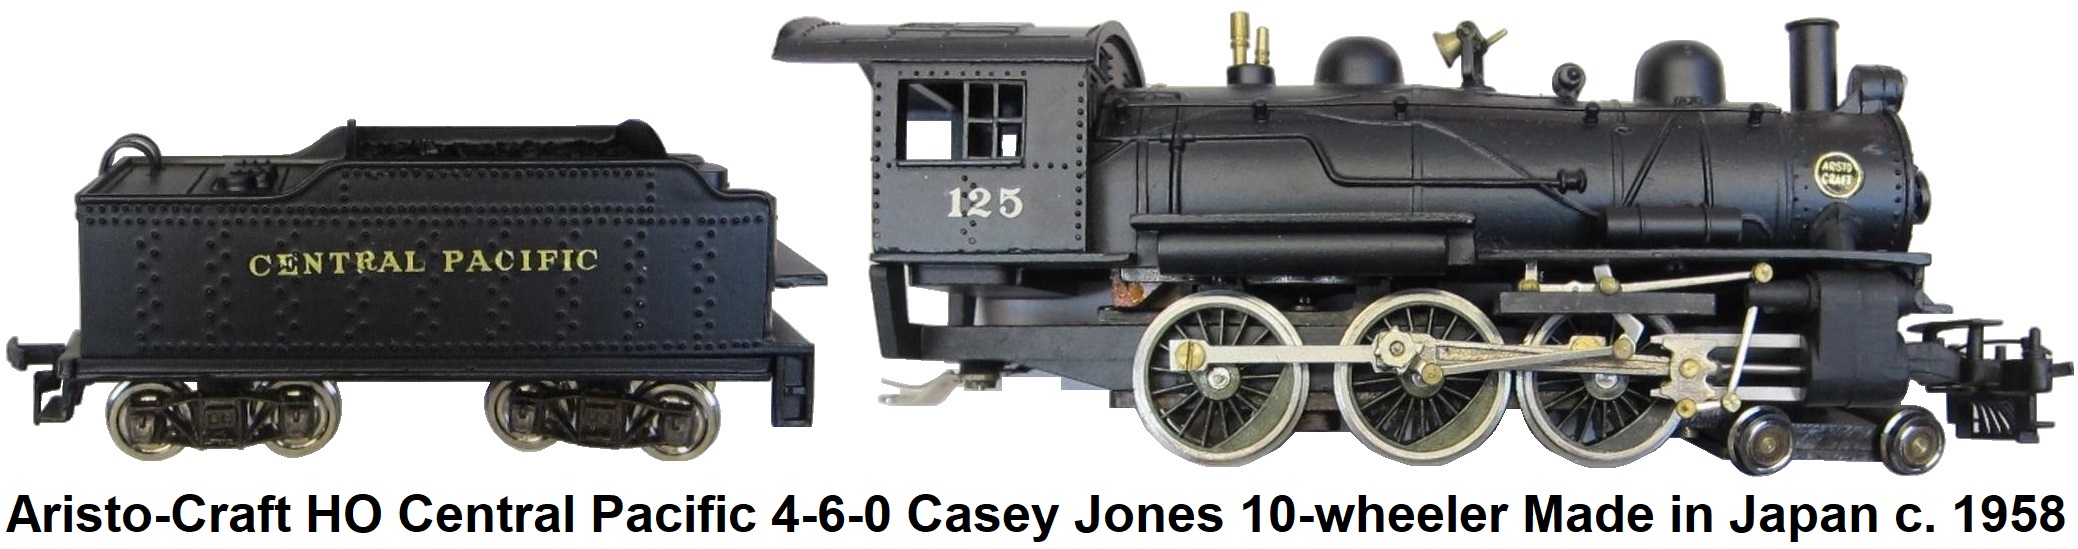 Aristo-Craft HO gauge Central Pacific RR Casey Jones 4-6-0 10-wheeler made in Japan by New One Model Co. circa 1958